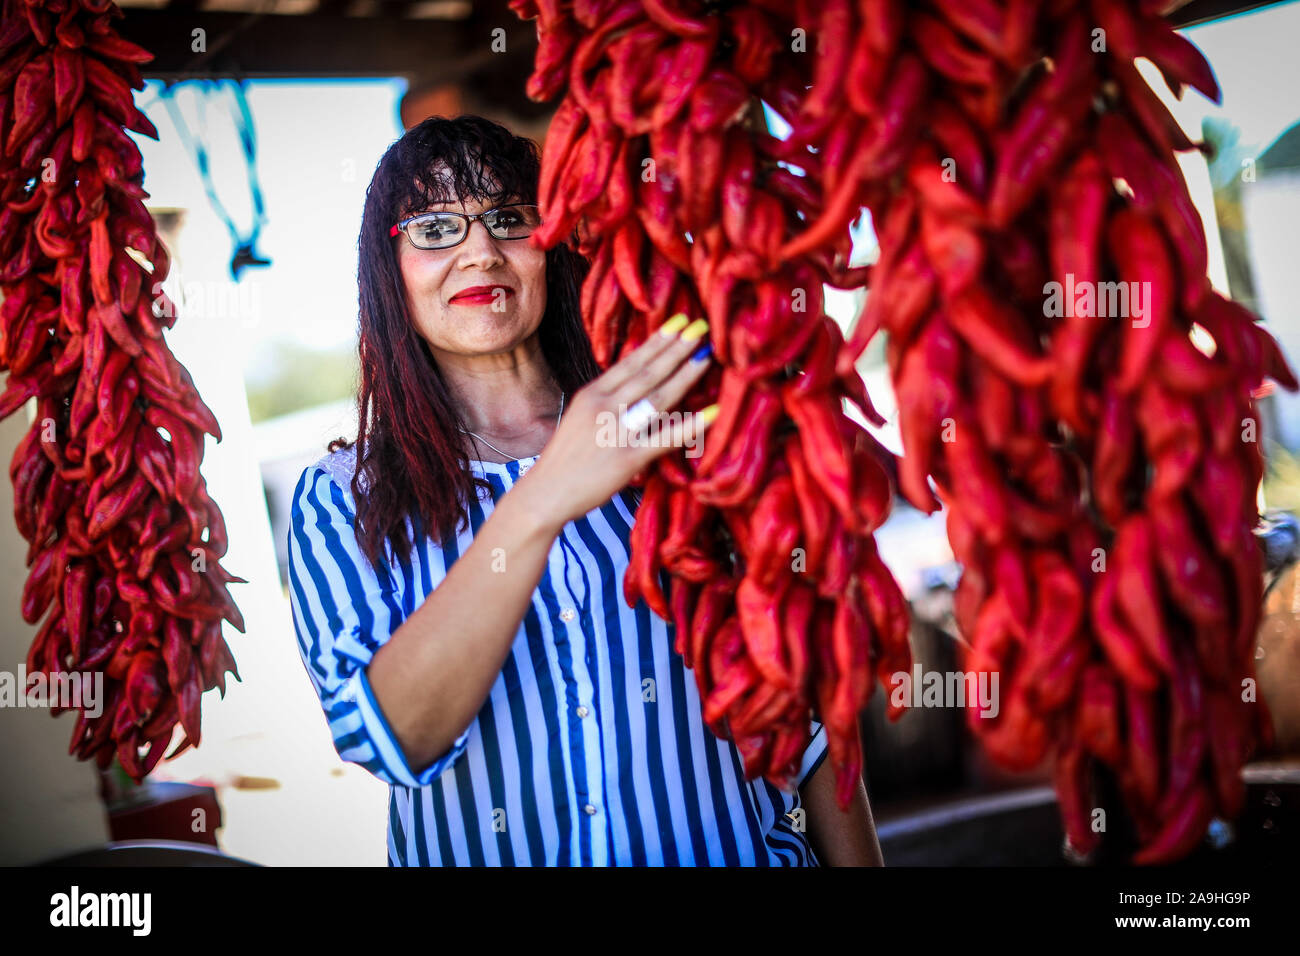 Ristras of red chile in the town Mazocahui, is part of the route of the Sonora River, Mexico. Gastronomy and Sonoran tradition. food, vegetables, red, Stock Photo